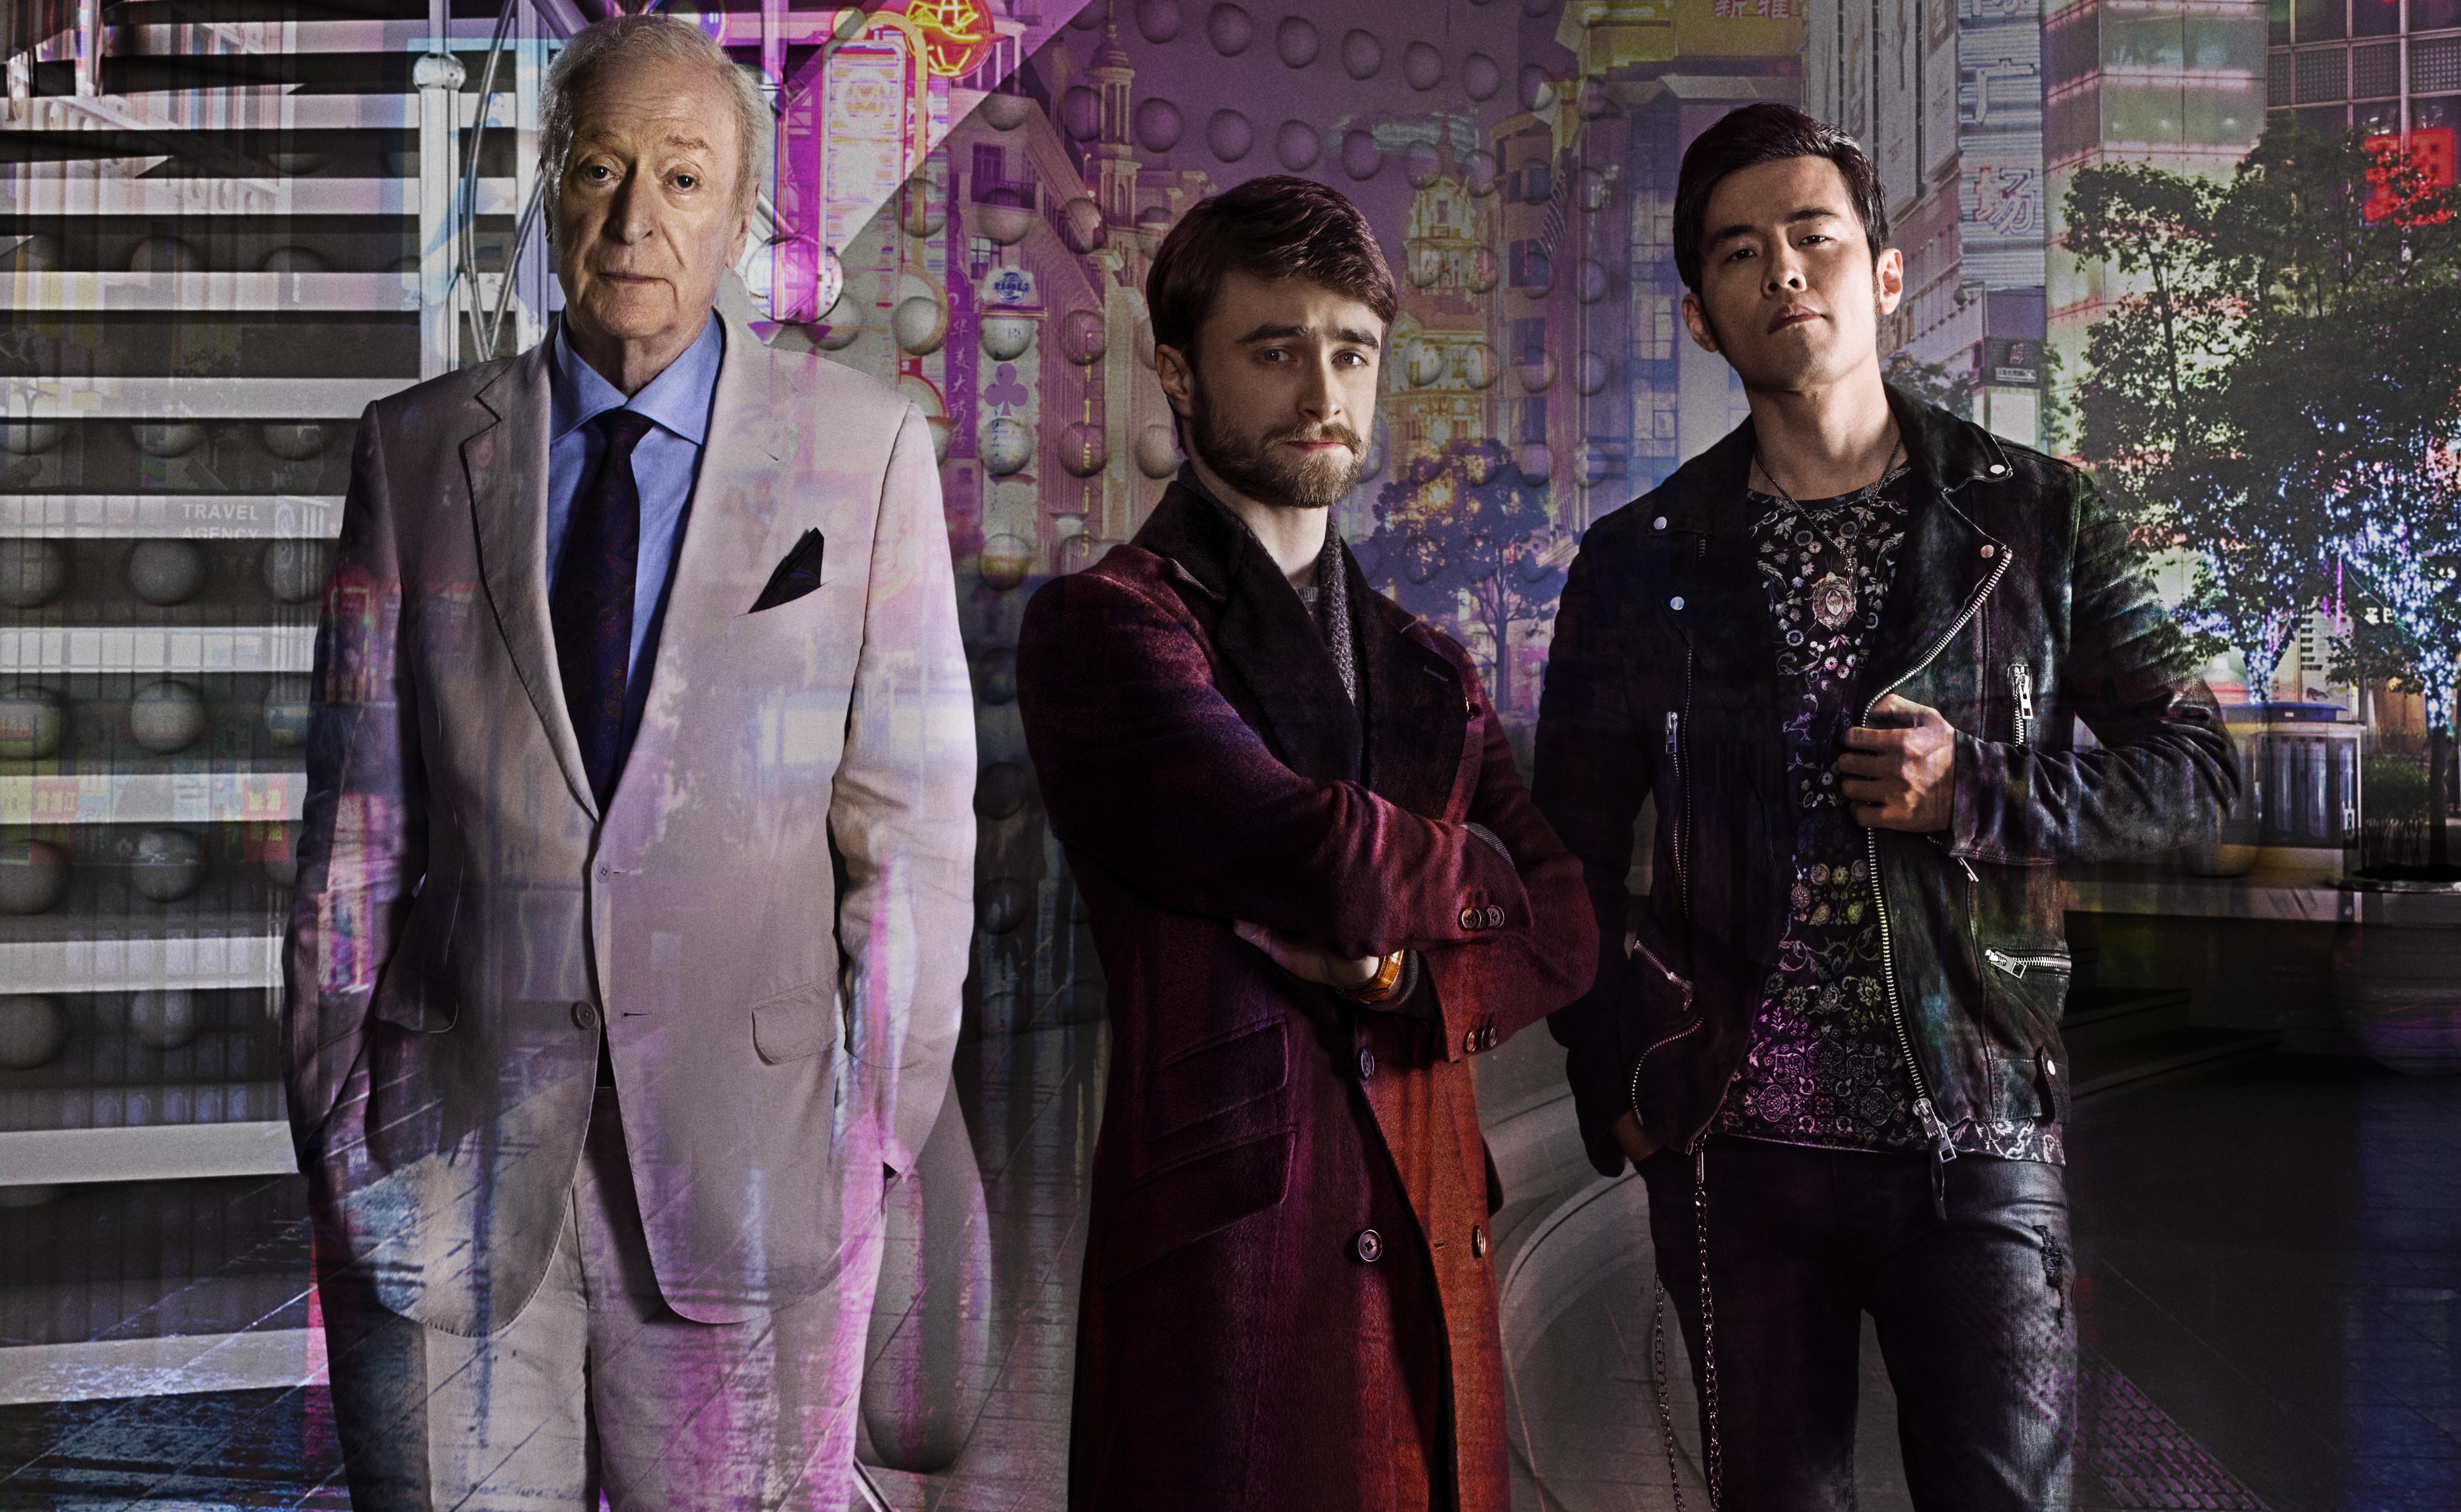 Daniel Radcliffe Jay Chou Michael Caine Now You See Me 2 5000x3072